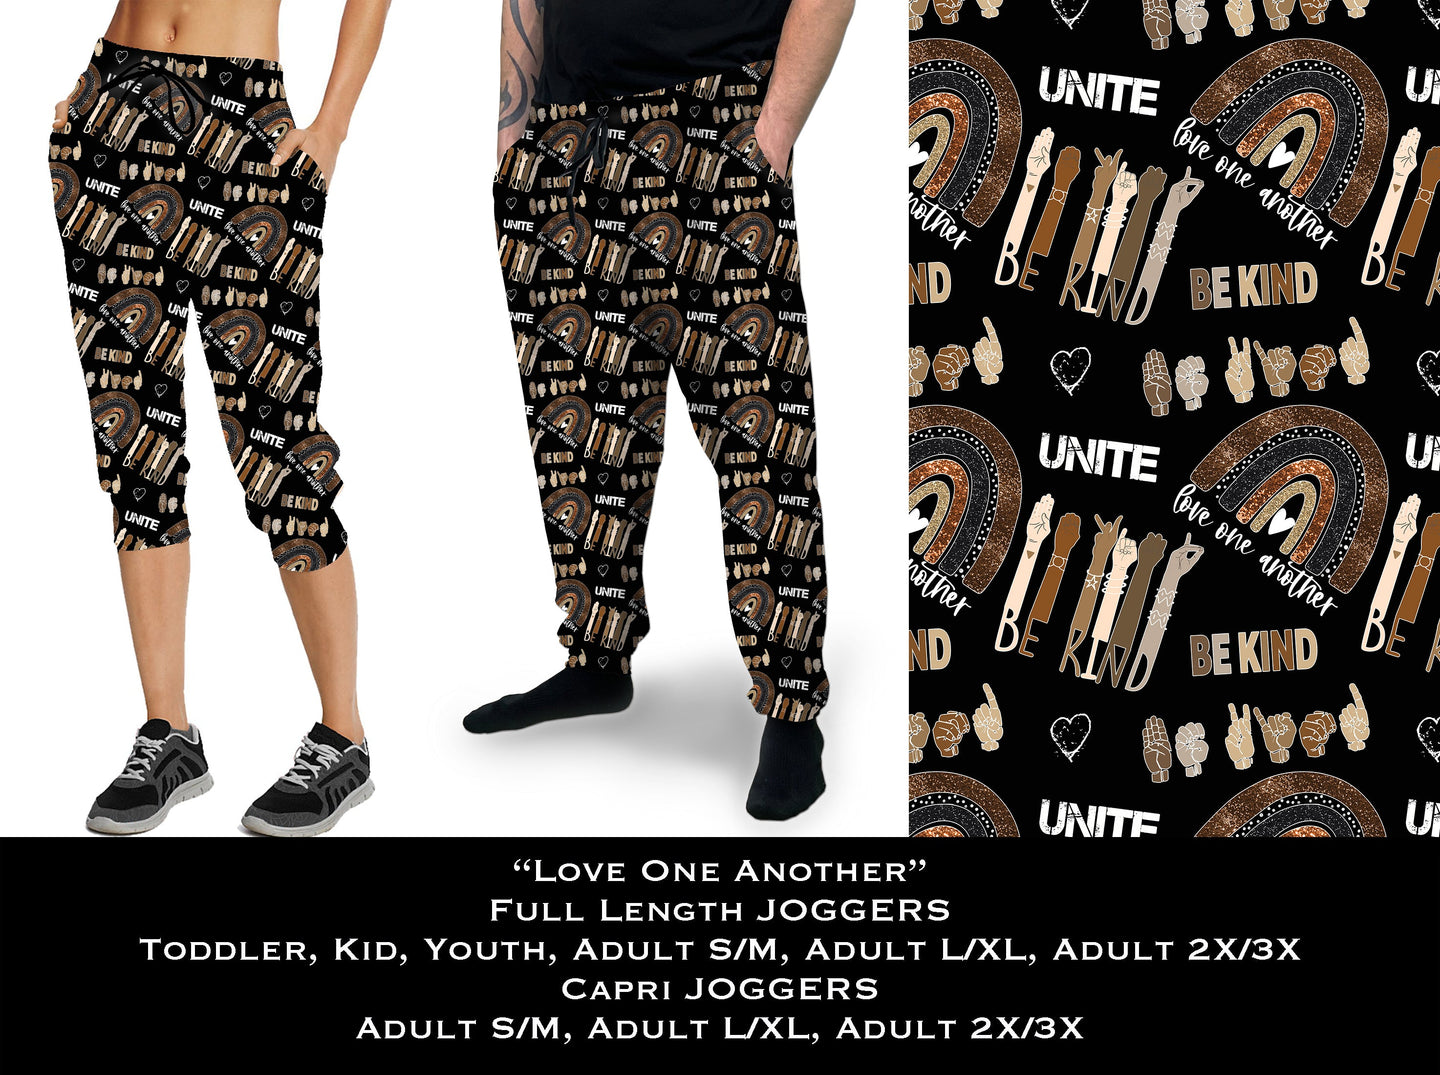 Love One Another - Full & Capri Joggers